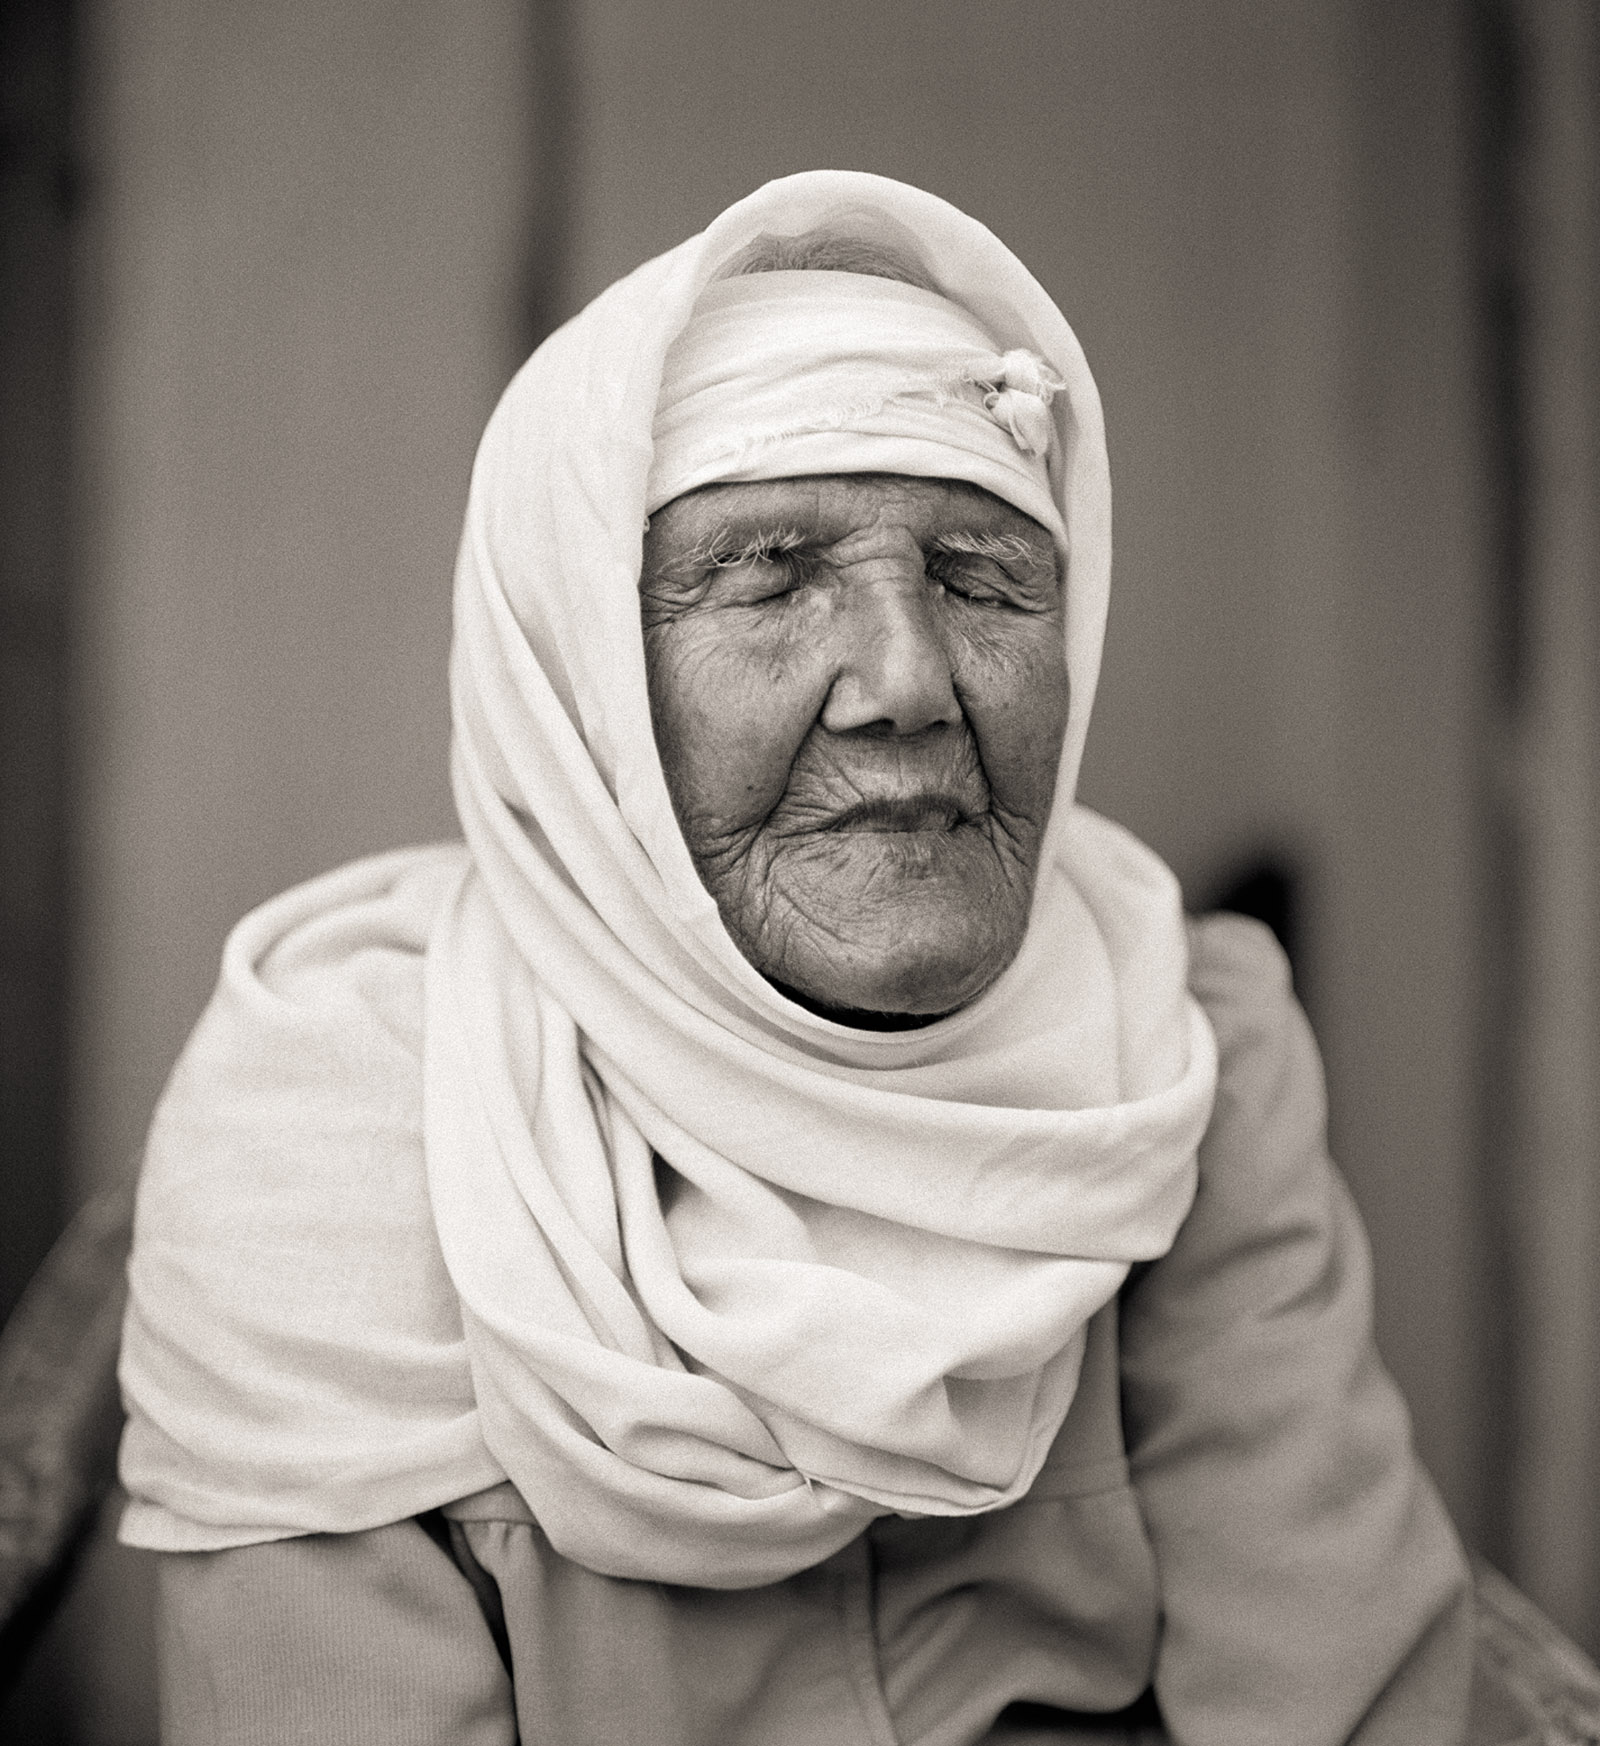 Anisa Ahmad Jaber Mahamid, born in 1908 in the Palestinian ­village of al-Lajjun, Jenin District, and ­photographed by Fazal Sheikh in the Arab-Israeli city of Umm el-Fahem, 2011. Her portrait appears in Memory Trace, the first volume in Sheikh’s Erasure Trilogy, published by Steidl in 2015.